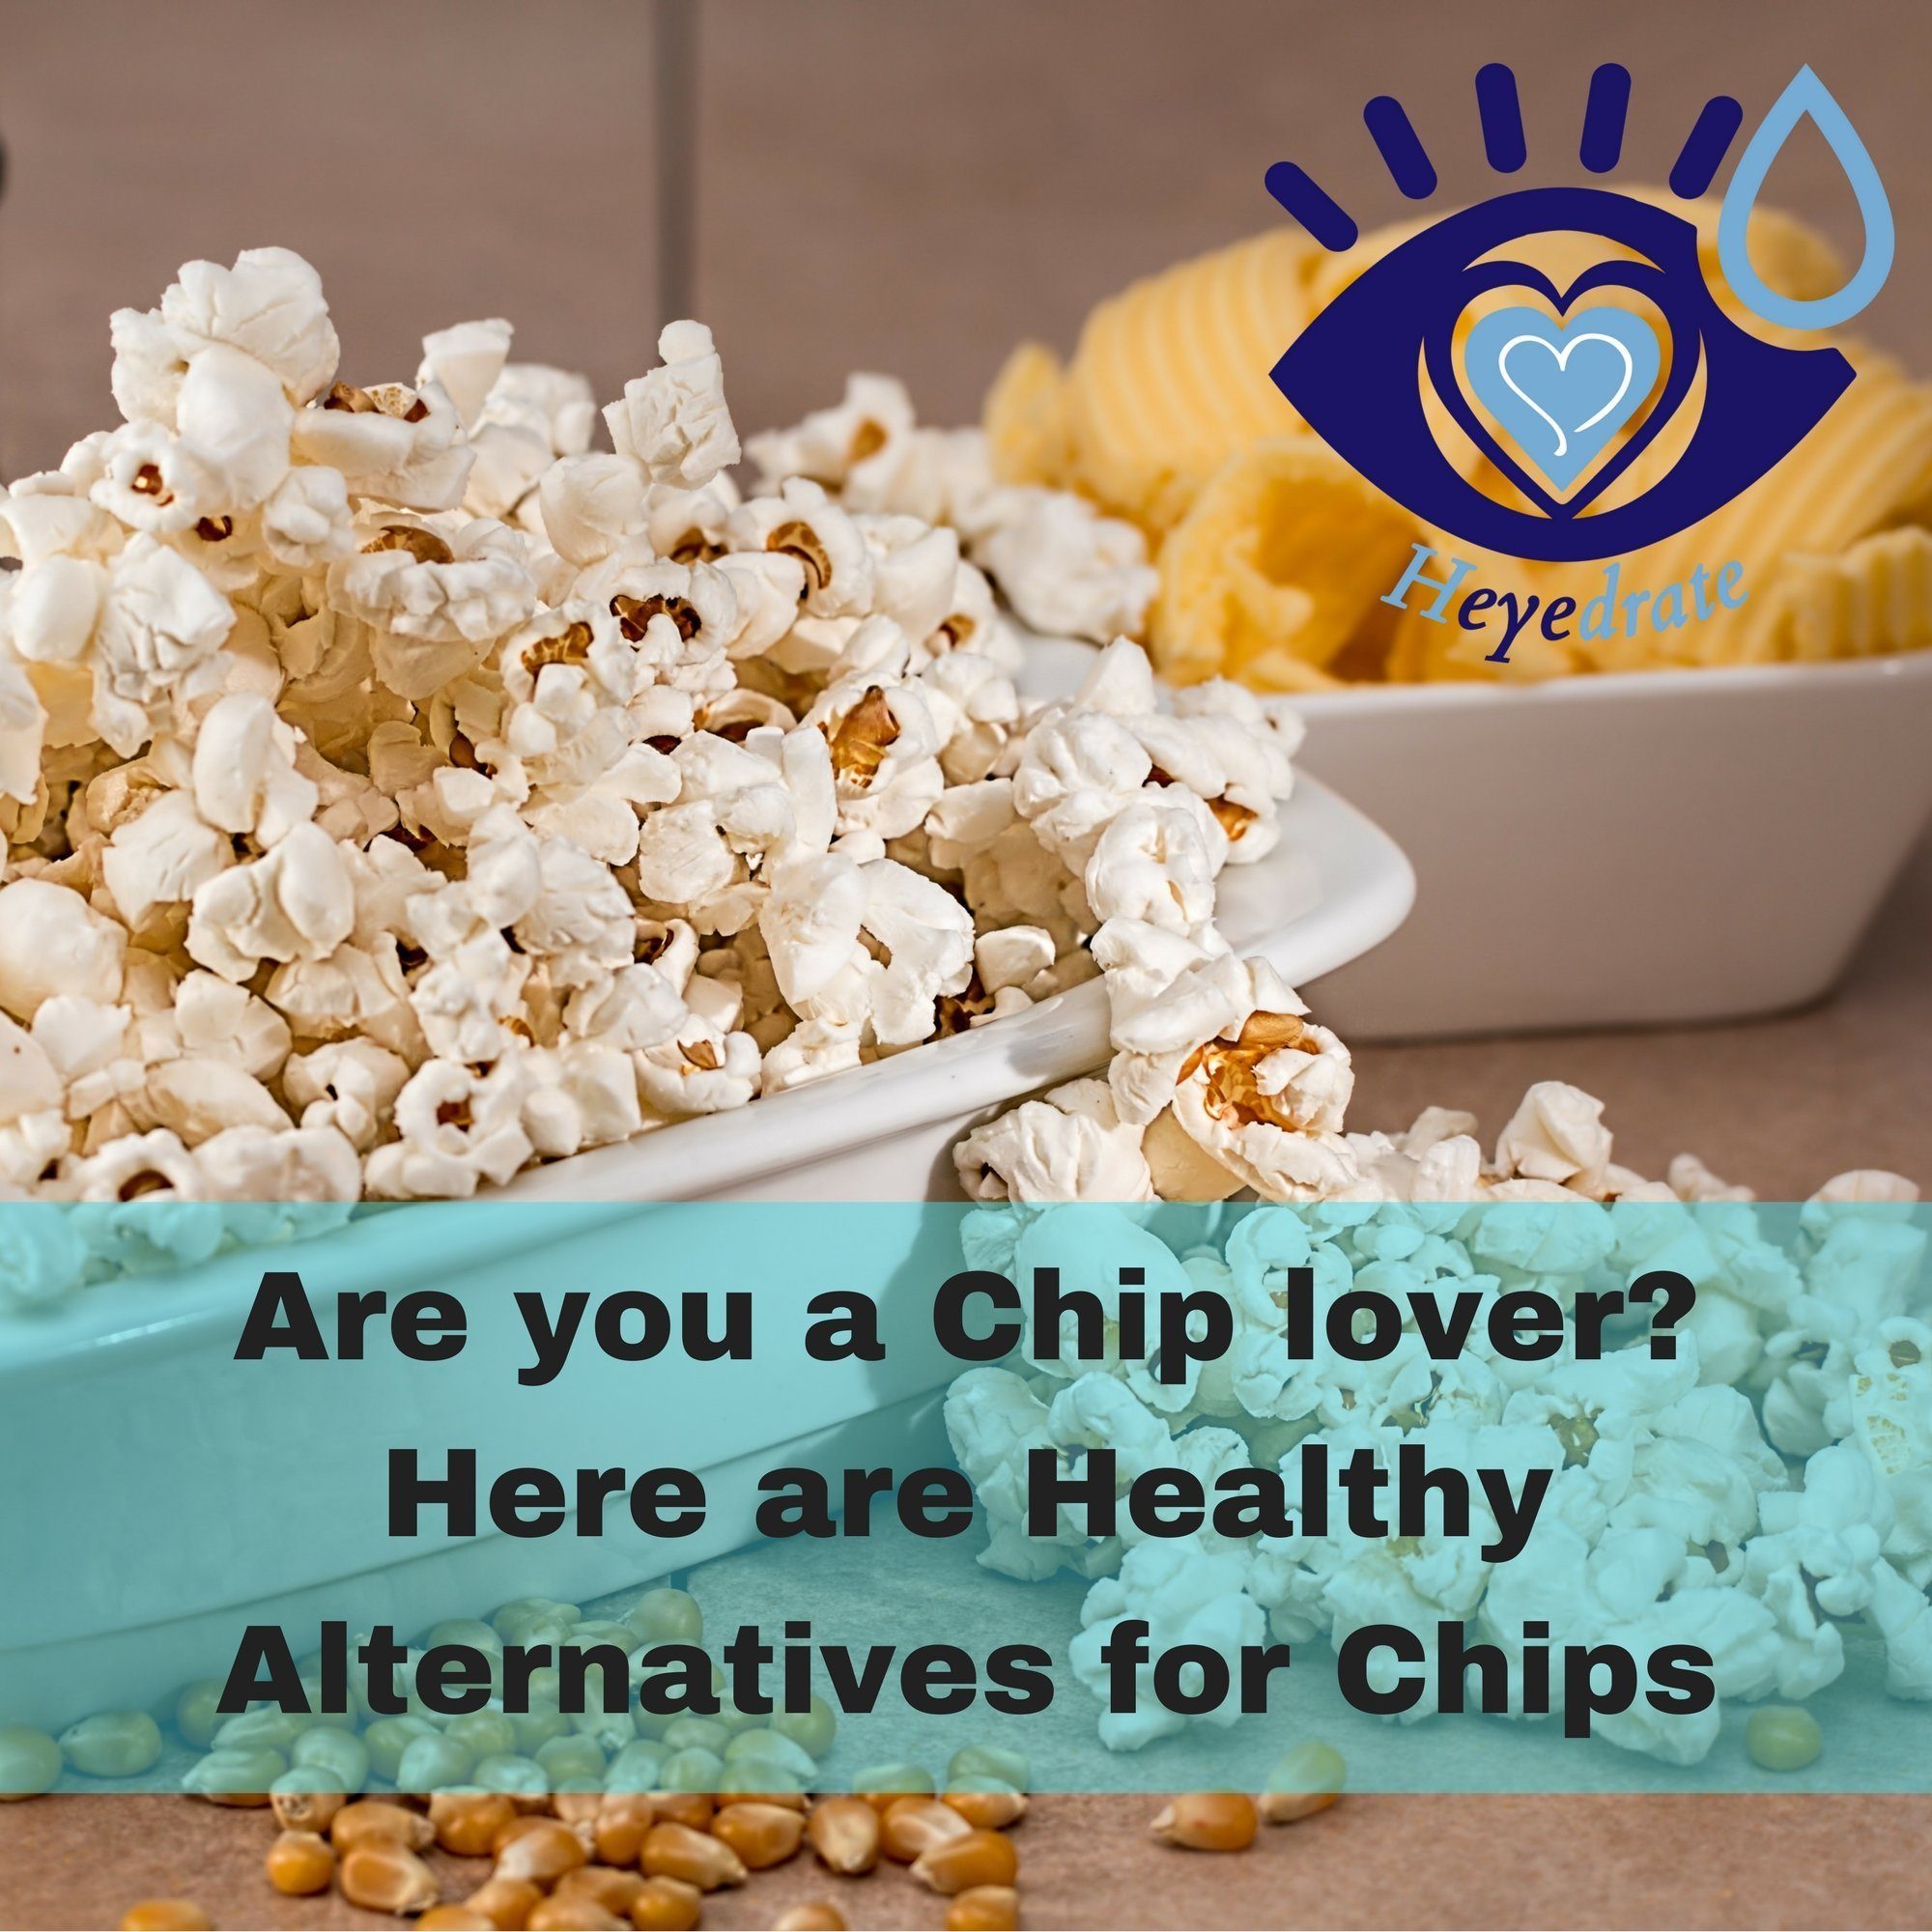 Are you a Chip lover? Here are Healthy Alternatives for Chips